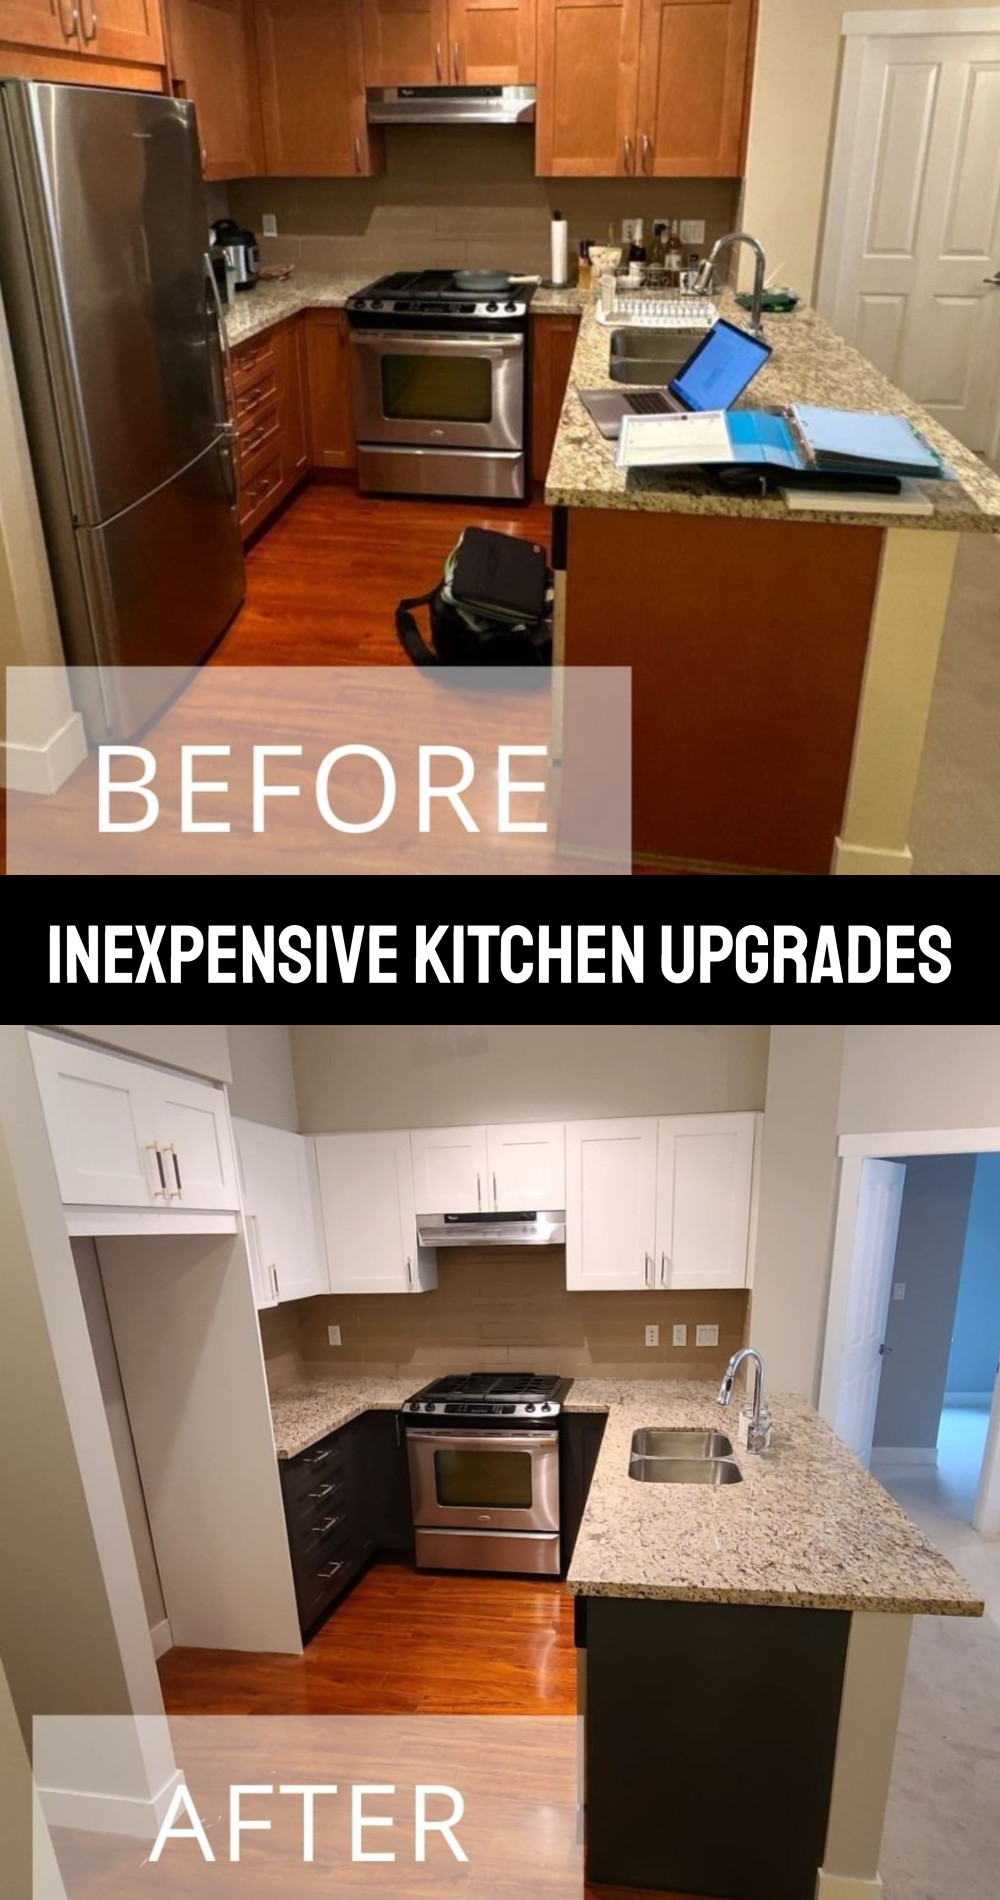 Inexpensive kitchen upgrades before and after